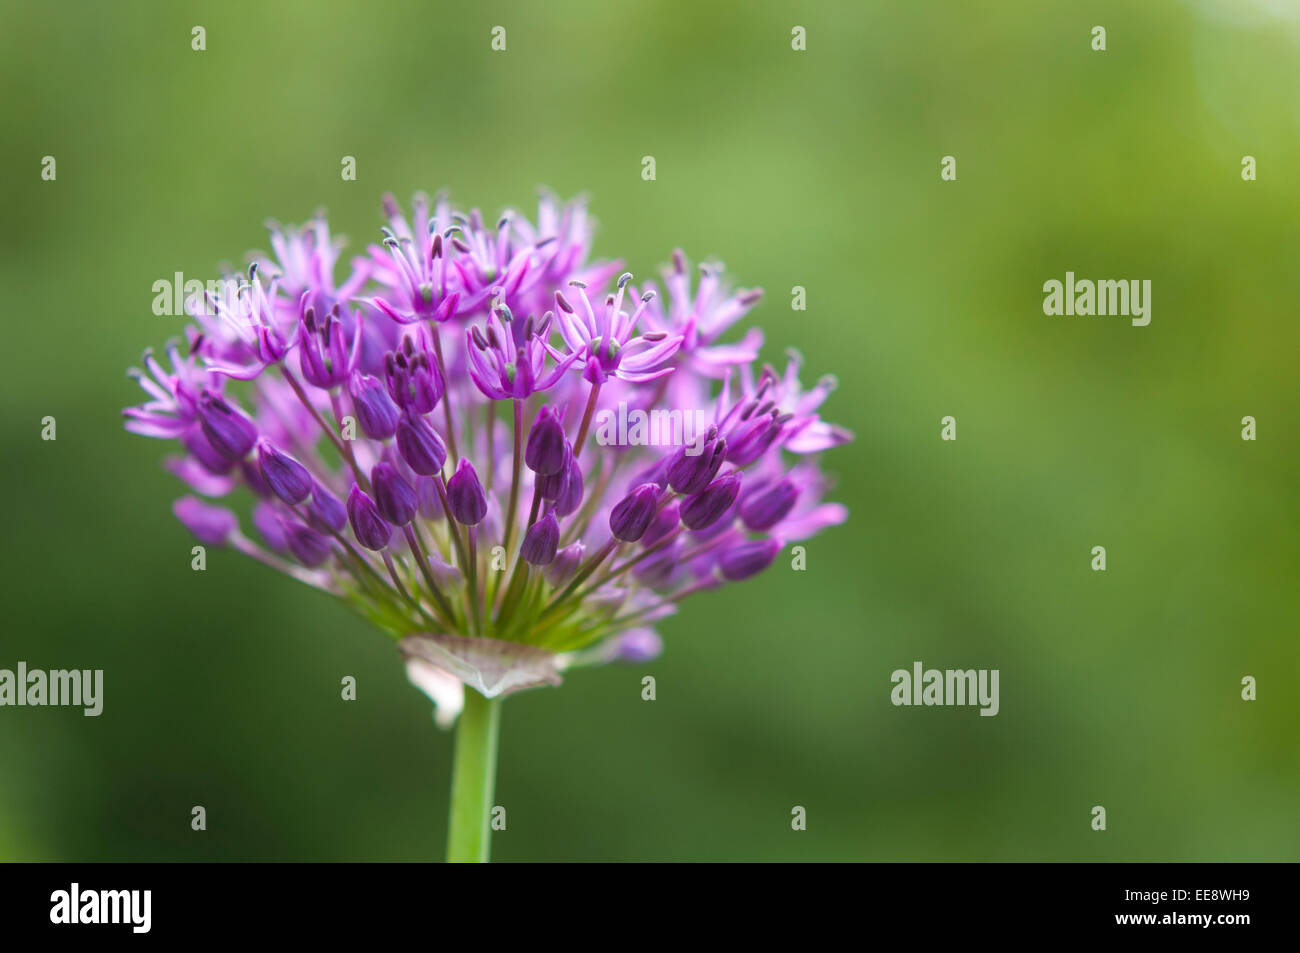 Purple Allium flower head with buds opening. Soft green background. Stock Photo